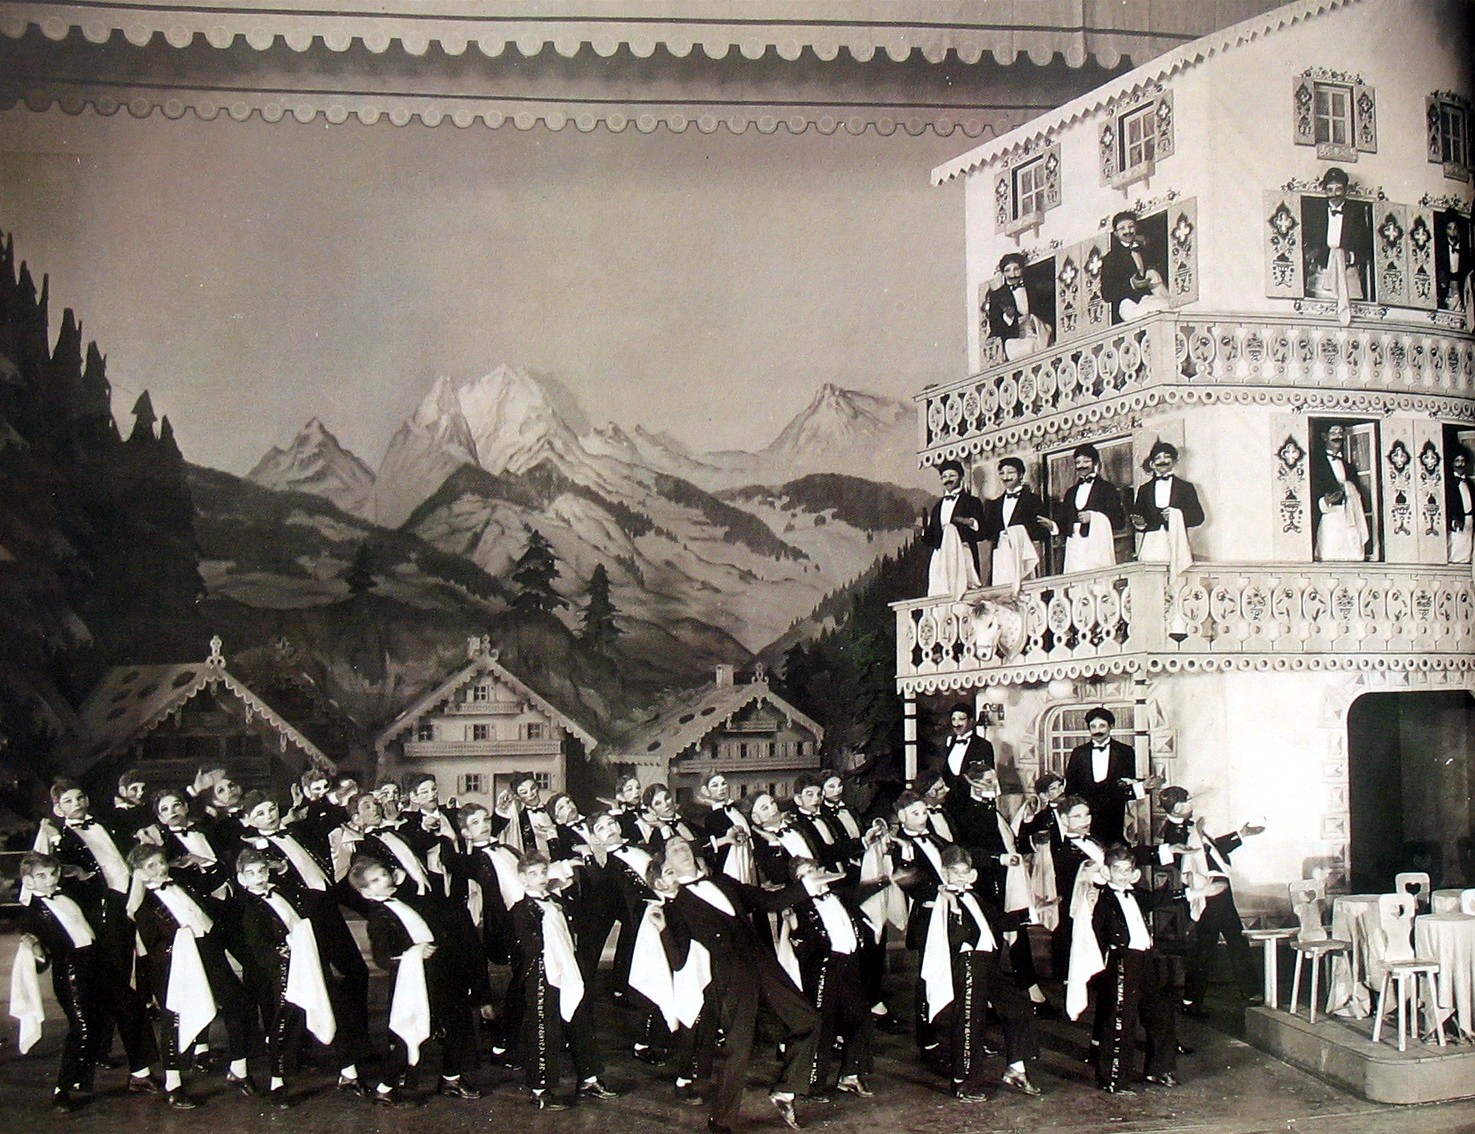 Waiters on parade: the grand marching scene from London, 1931.